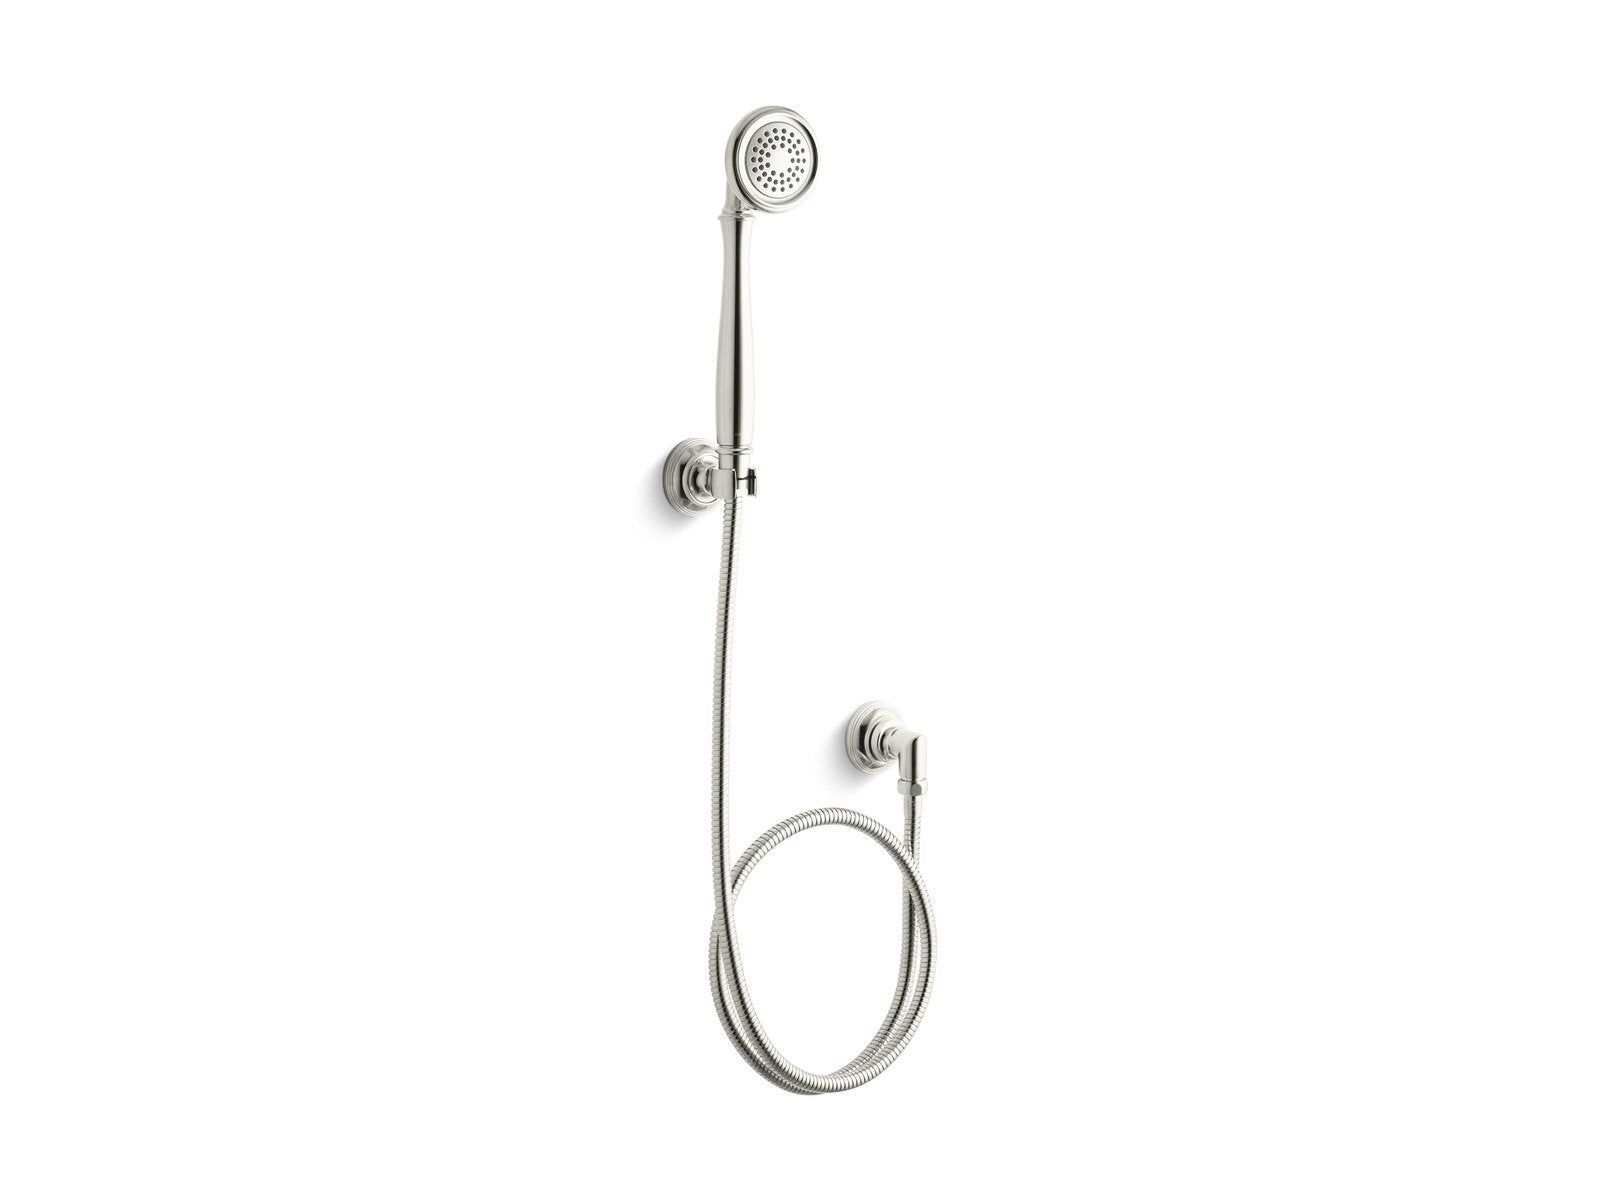 Kallista P24653-00-ULB Bellis Single Function Handshower and Hose with 1.75 GPM